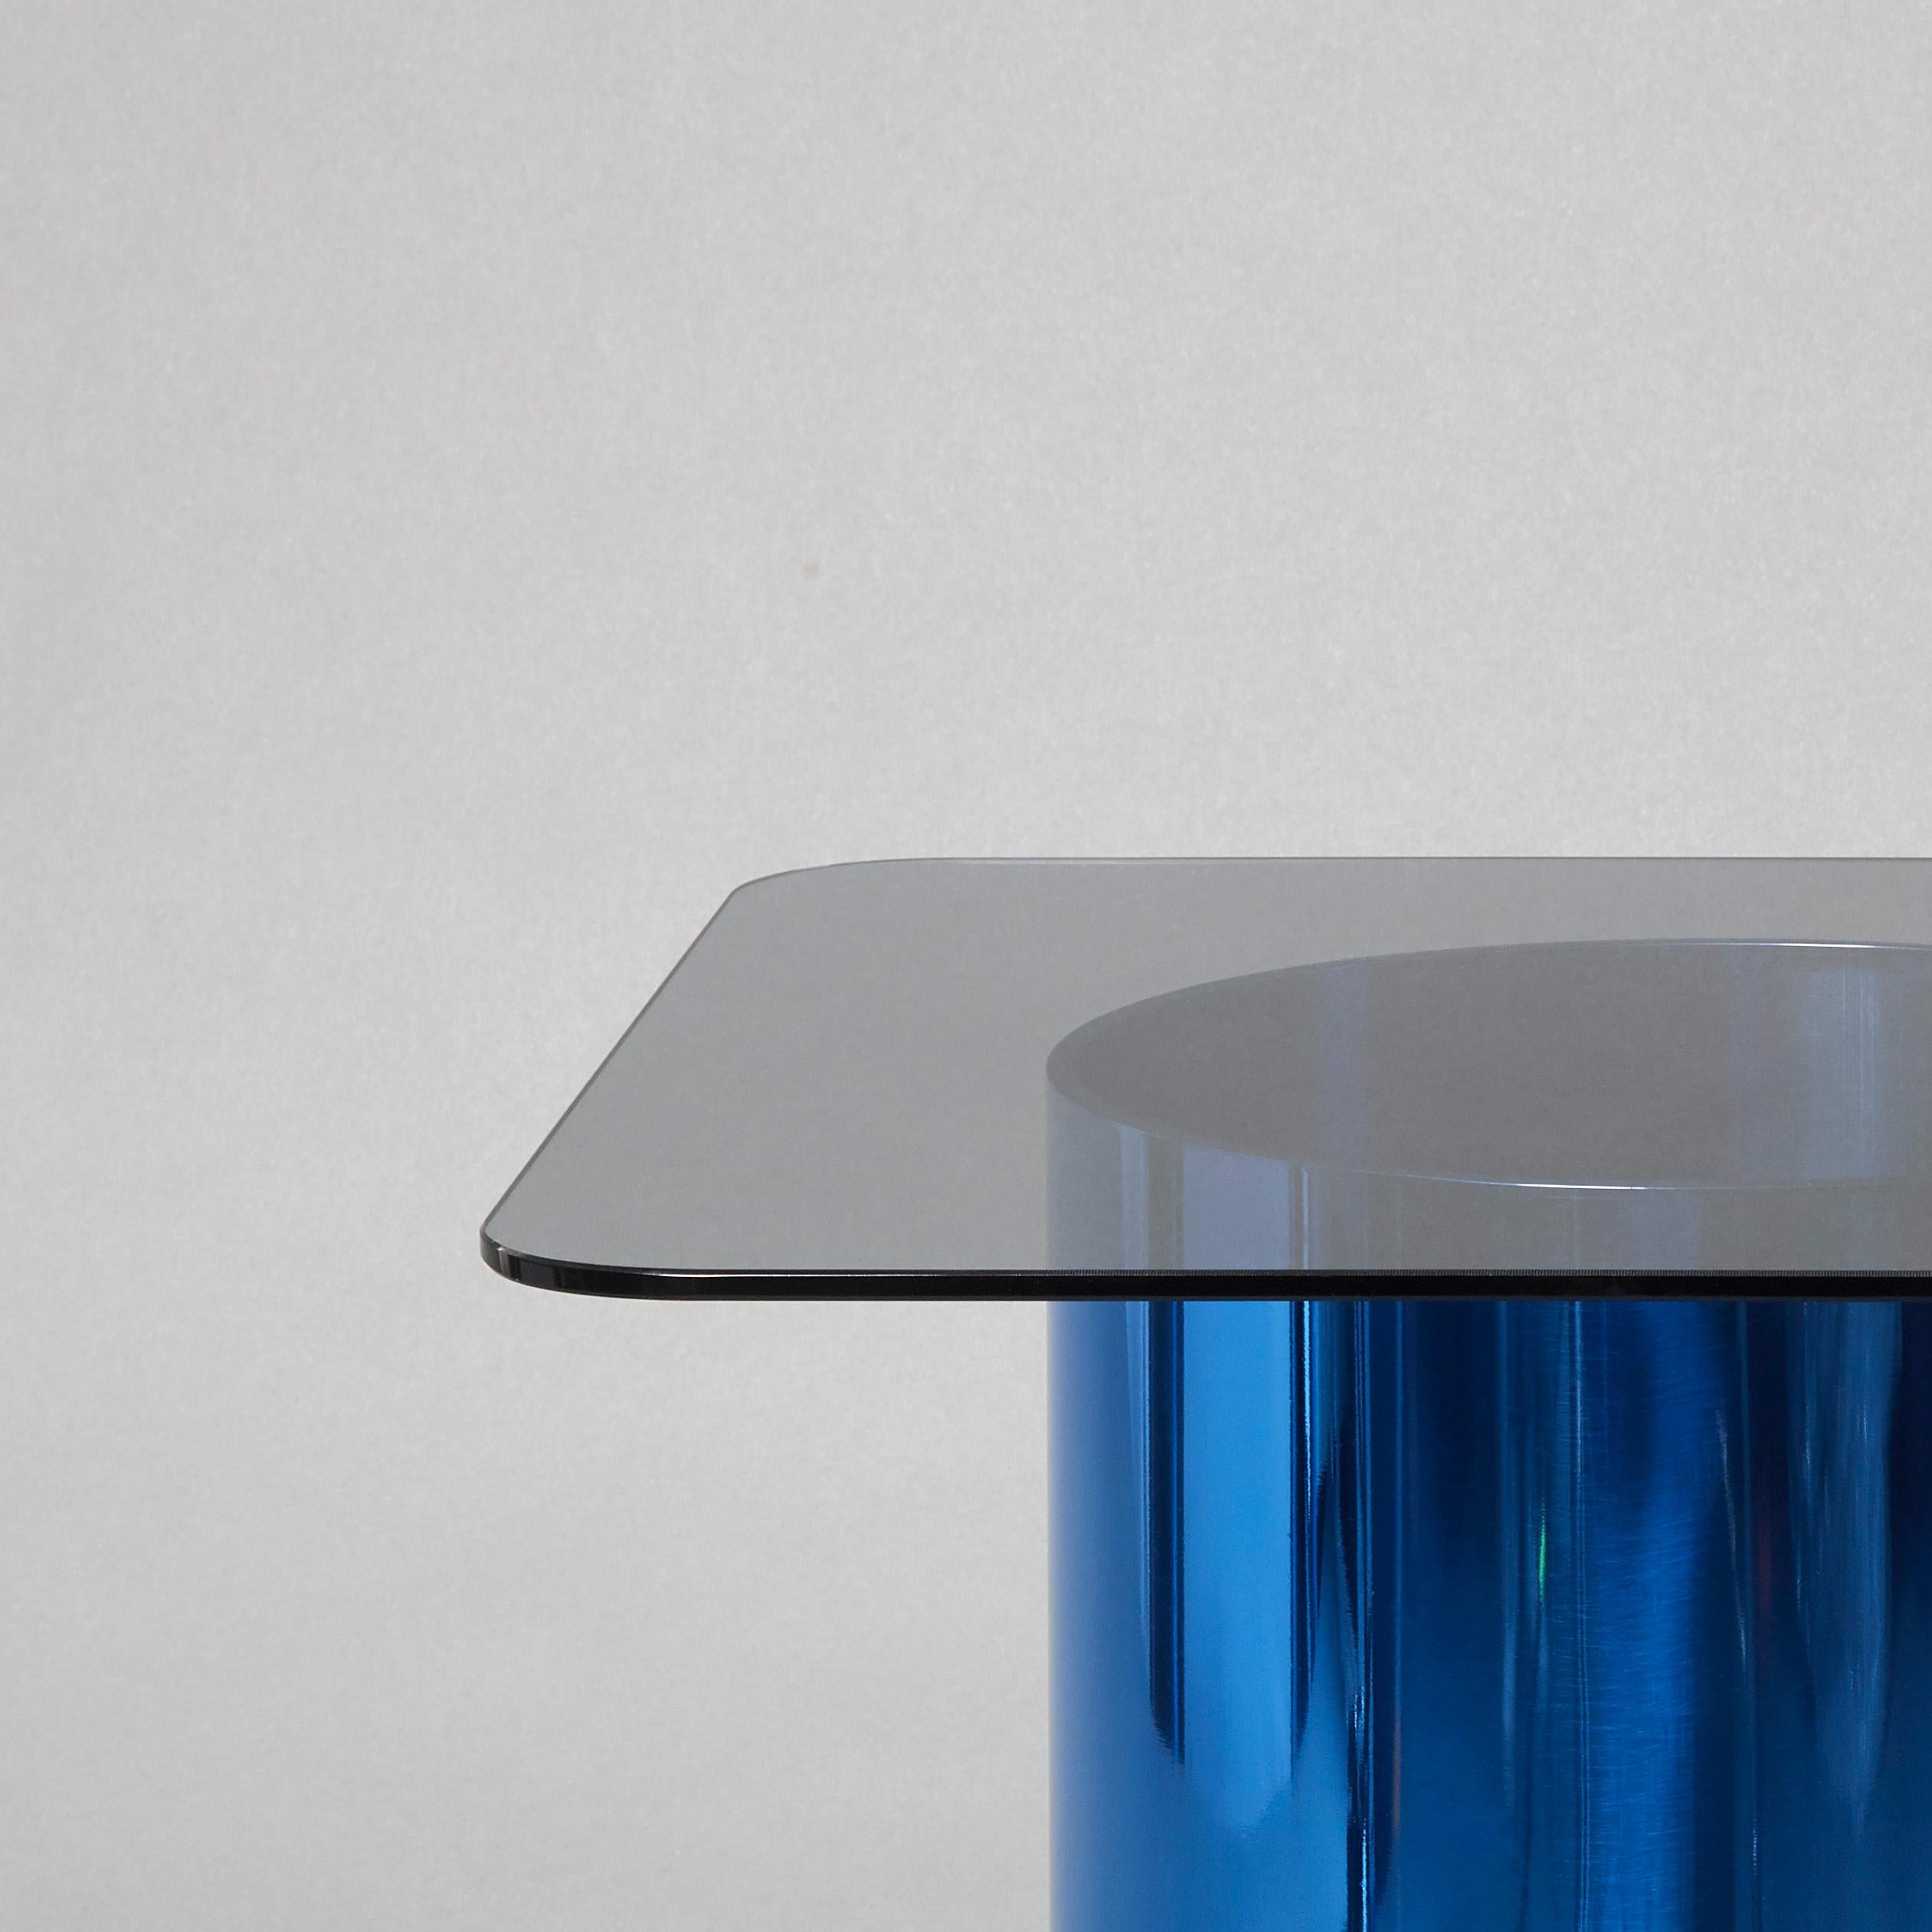 This minimalist side table further explores the designer’s obsession with tubular metal and graphical form.

Still in his trademark minimal style, the table is crafted in large hand-polished blue tinted aluminium tubes (A specialist process